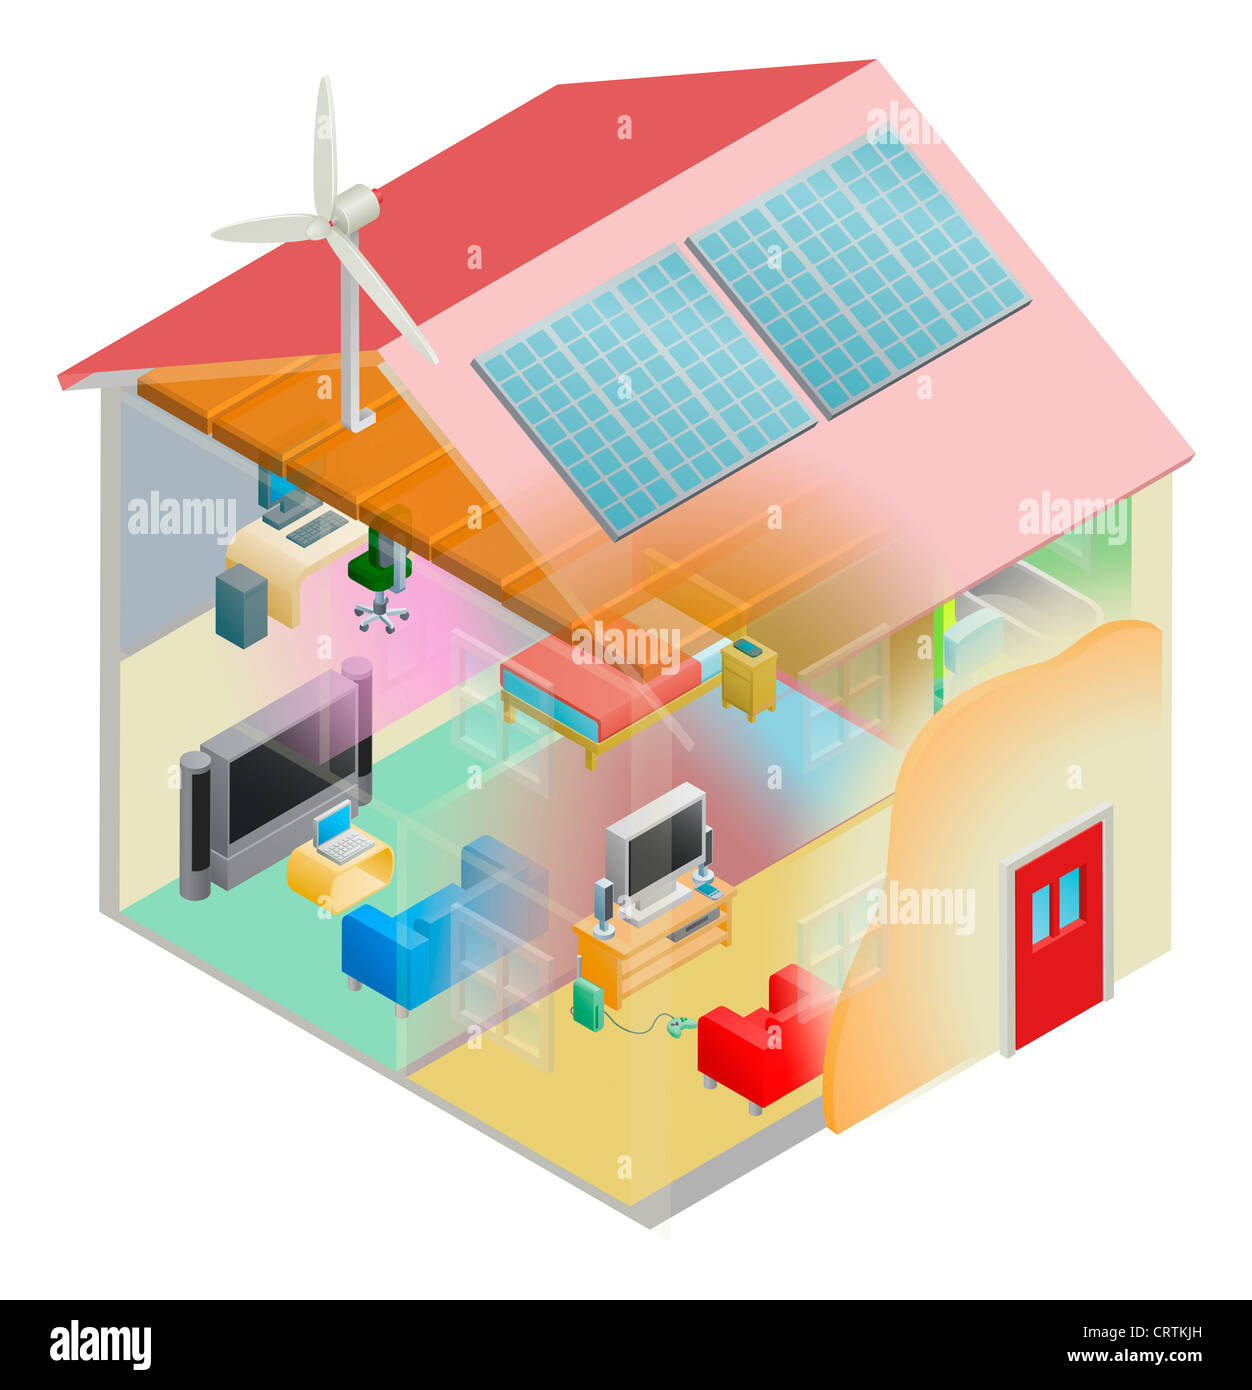 Energy efficient home house with cavity wall and loft insulation, wind turbine and solar panels on the roof. Stock Photo